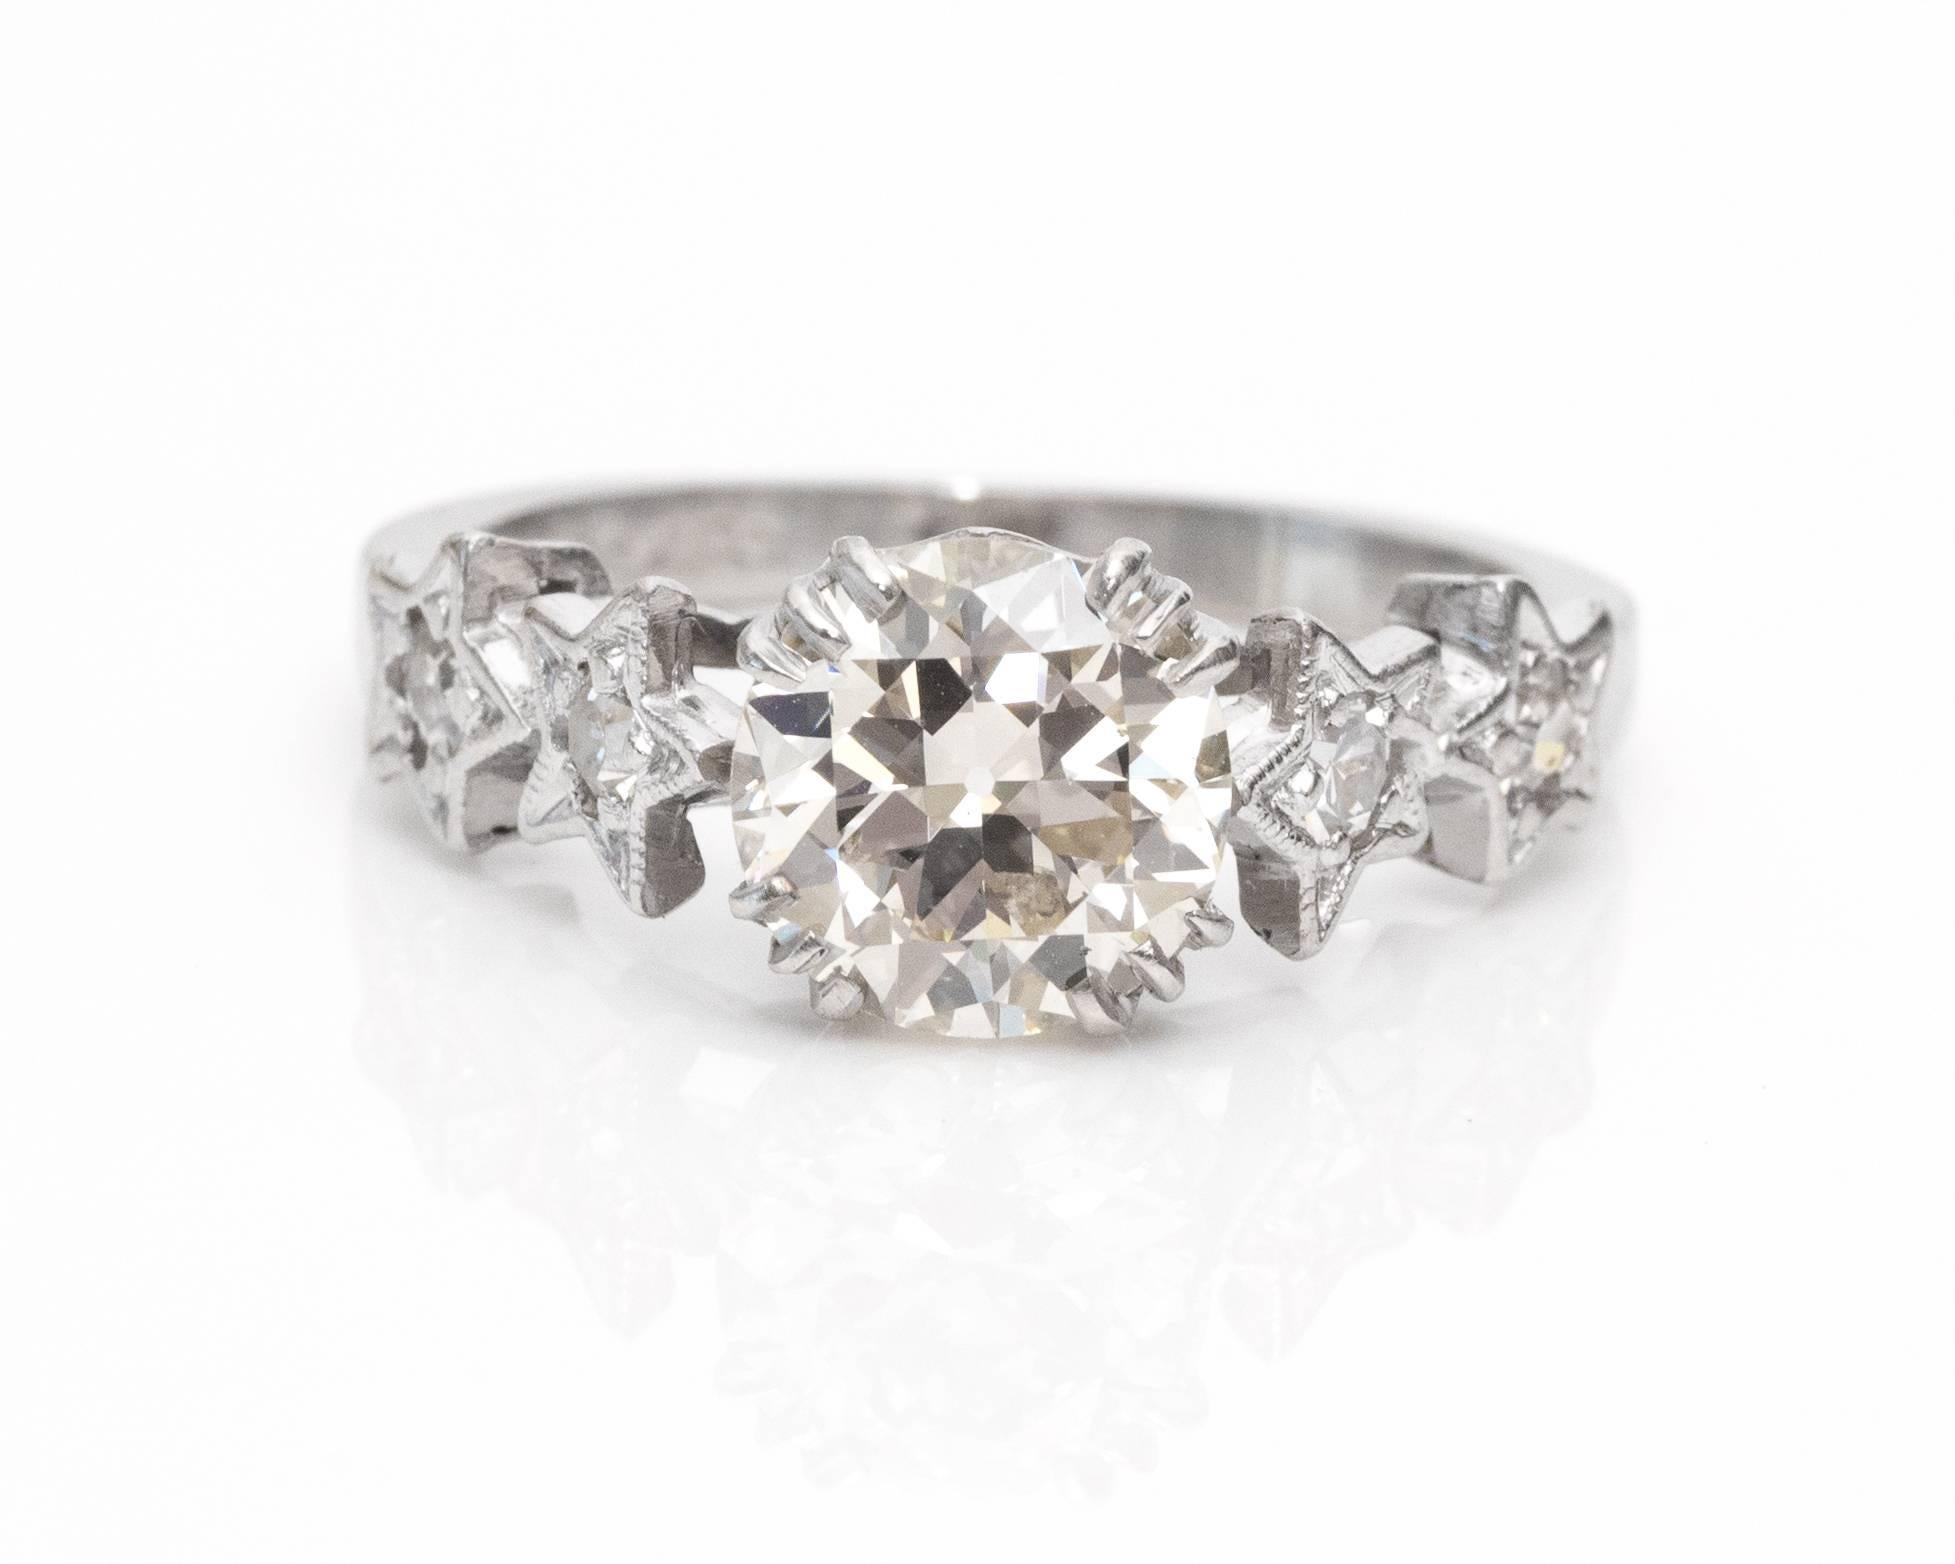 1920s Art Deco 1.53 Carat GIA Certified Diamond Platinum Engagement Ring. A rare and original piece is unique due to the four star-shaped accents on the shoulders of this ring. The center diamond is an Old European cut 1.53 carat diamond with GIA